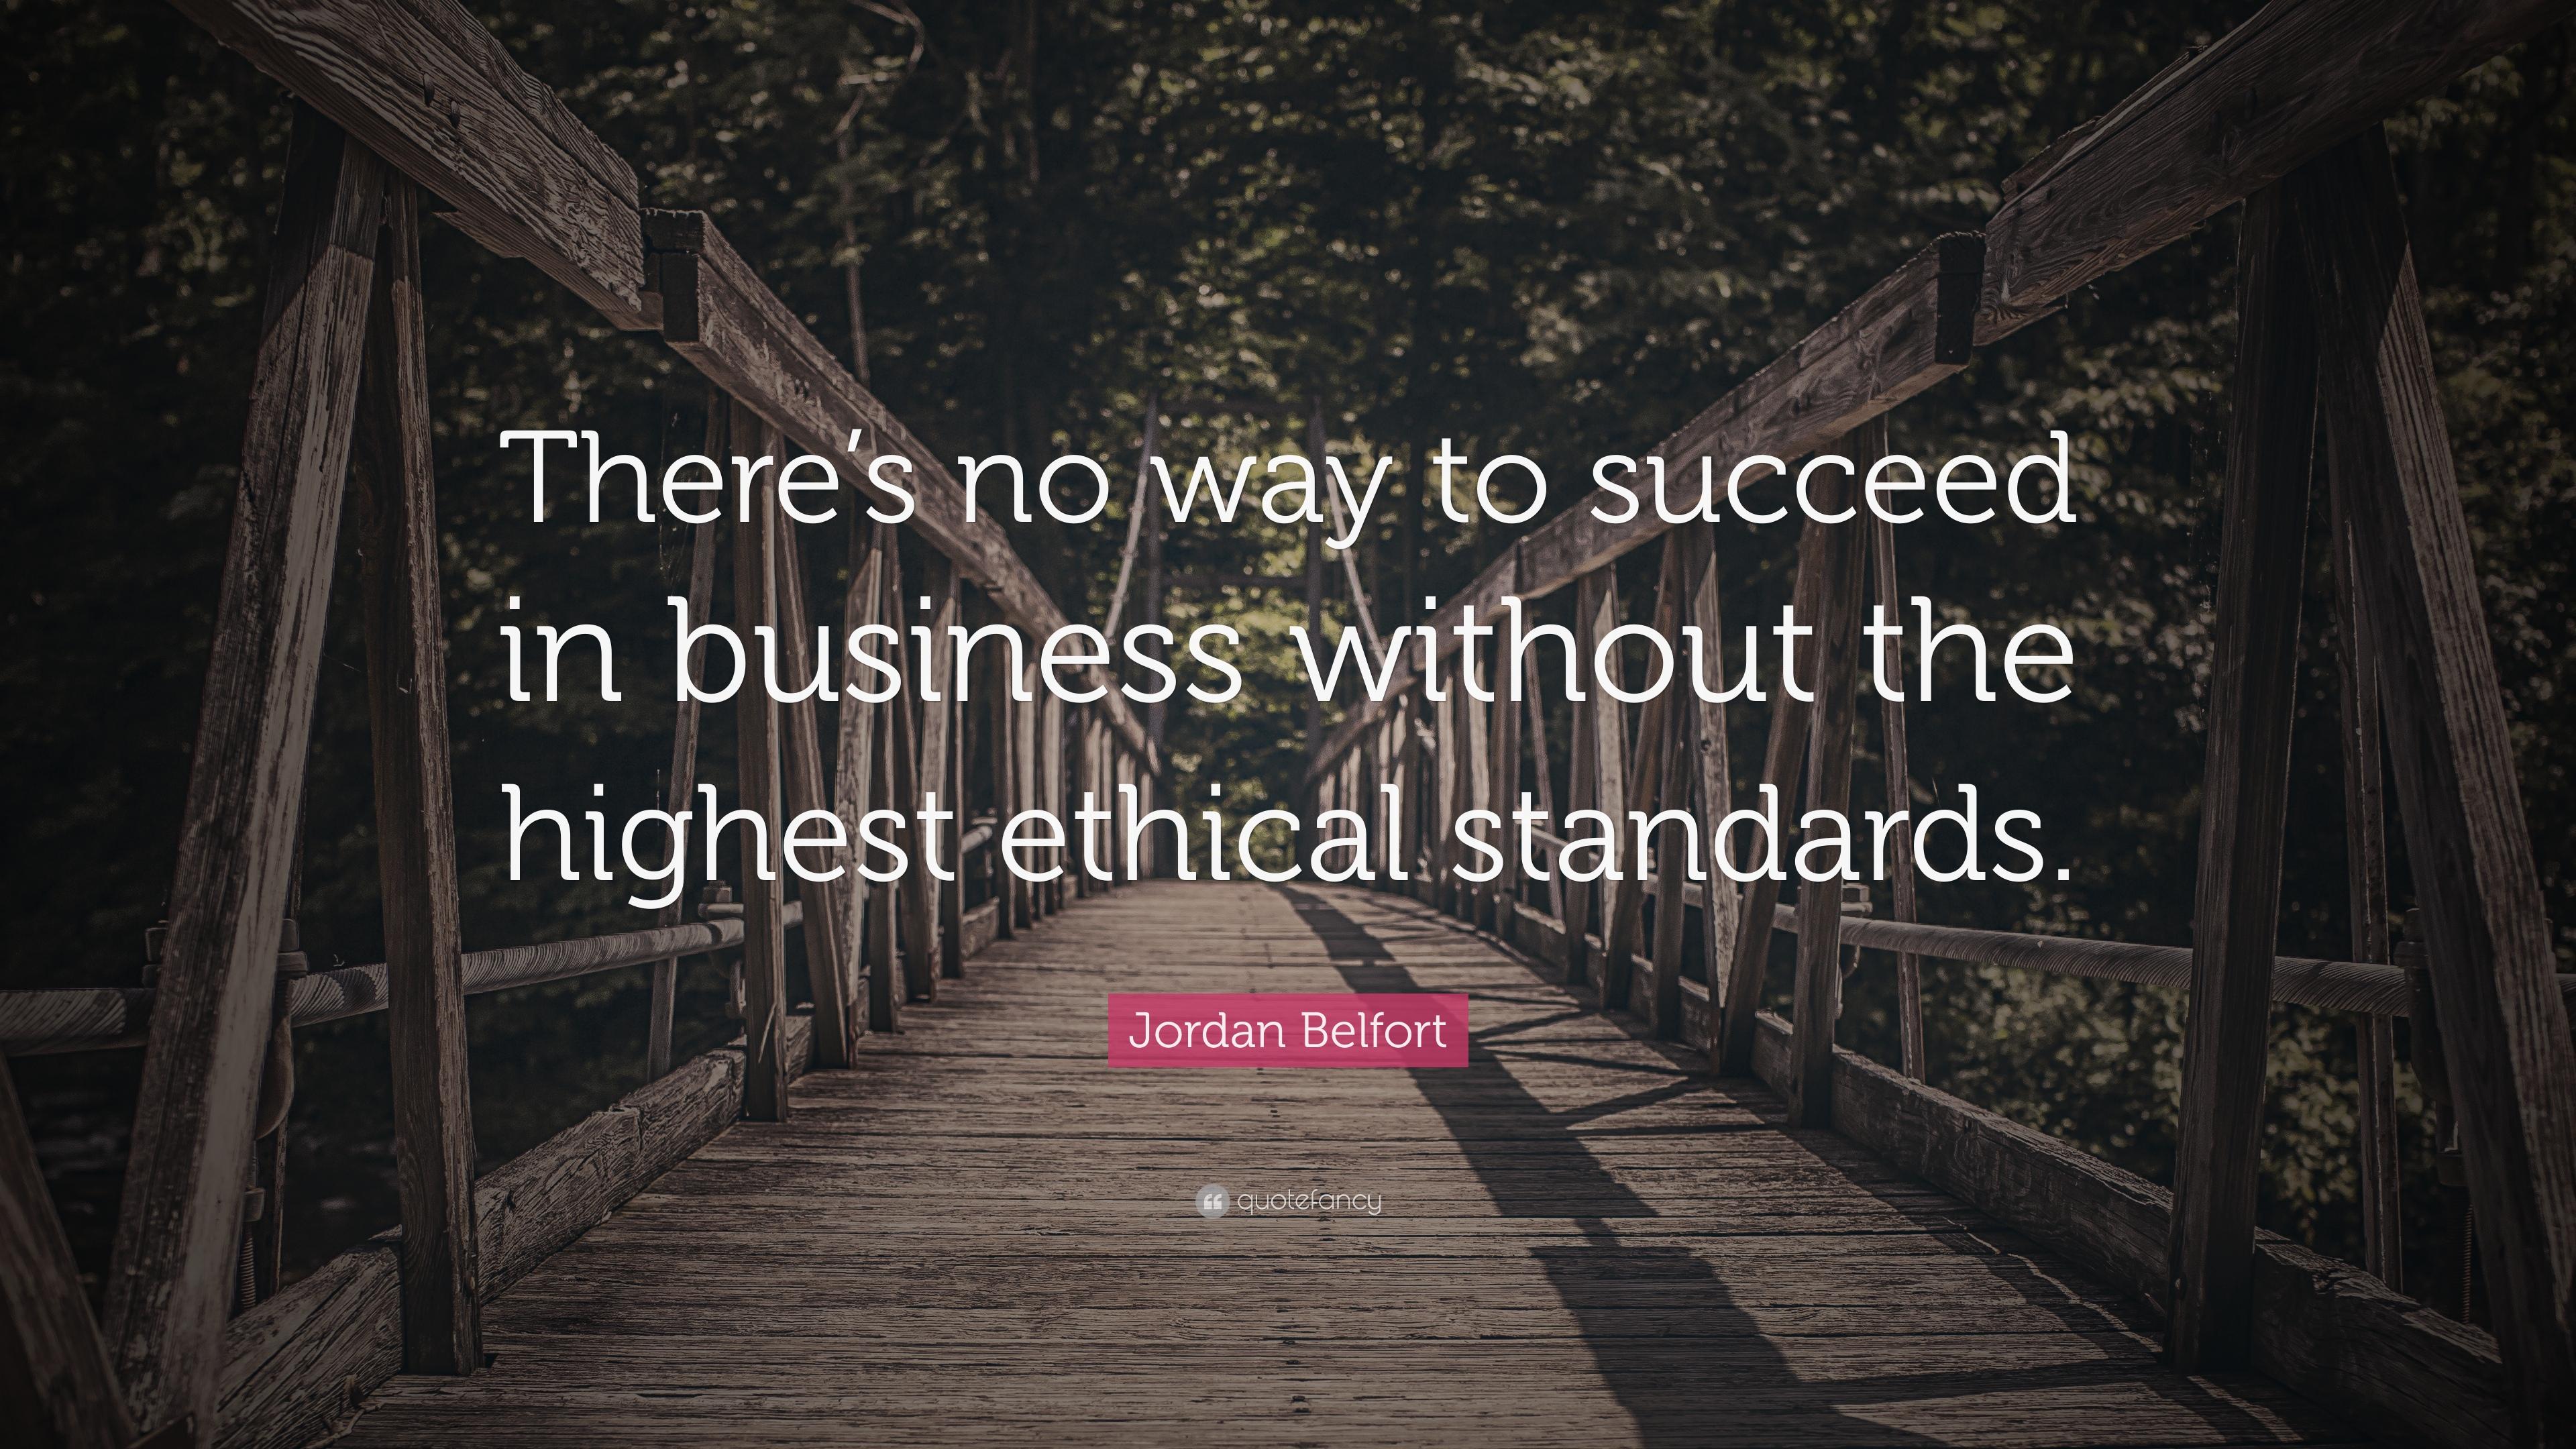 Jordan Belfort Quote: “There's no way to succeed in business without the highest ethical standards.”